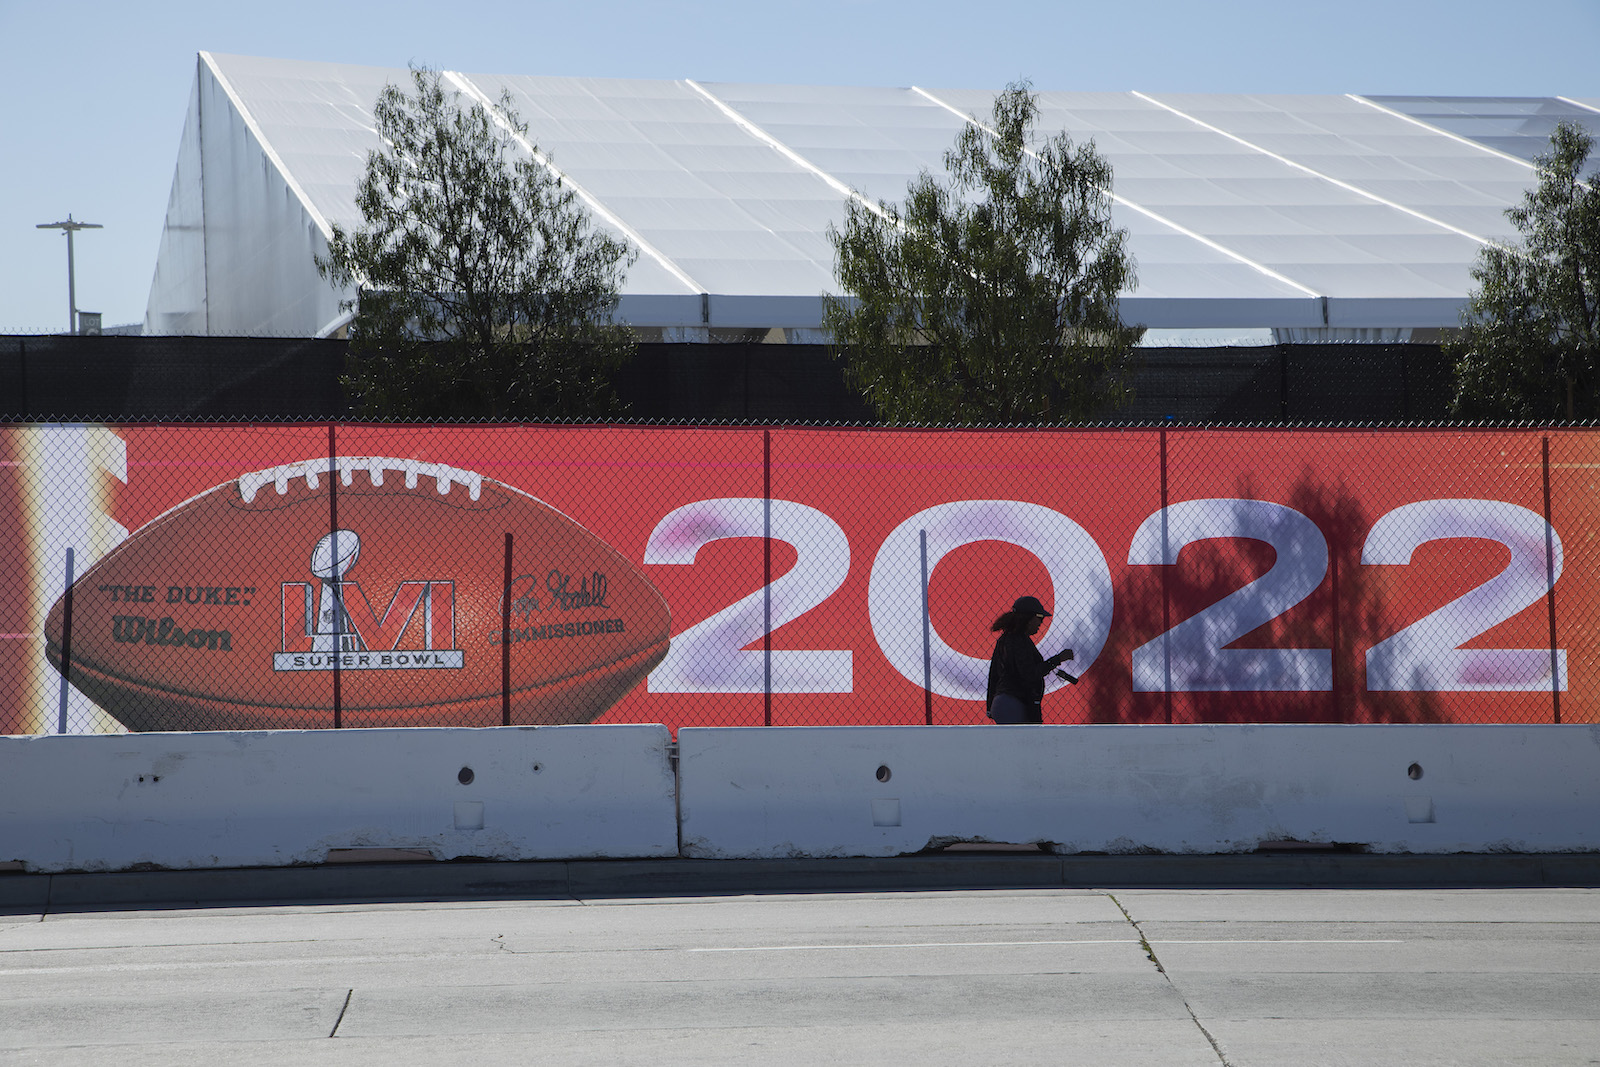 Event tents and stages at SoFi Stadium will worsen the scarcity of parking spaces for Super Bowl Sunday. Nearby home and business owners will open their property for parking but for a very steep price.